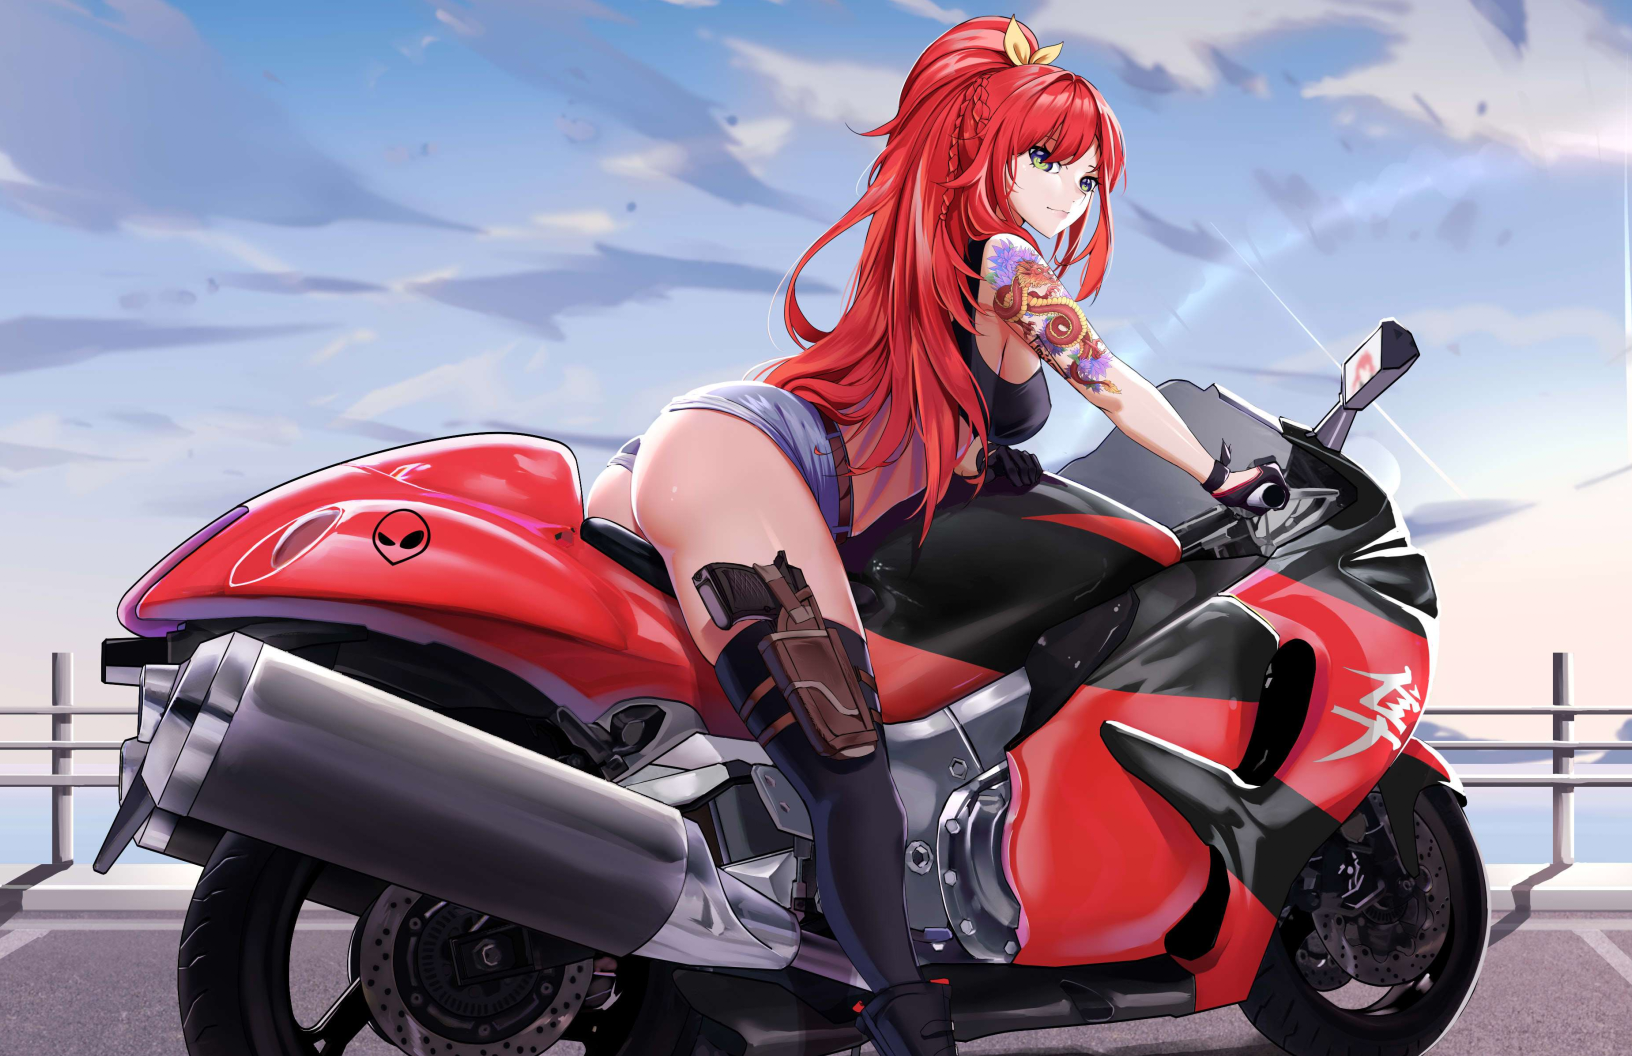 ELL-04 Elly Red Motorcycle - Therrao - Store Image